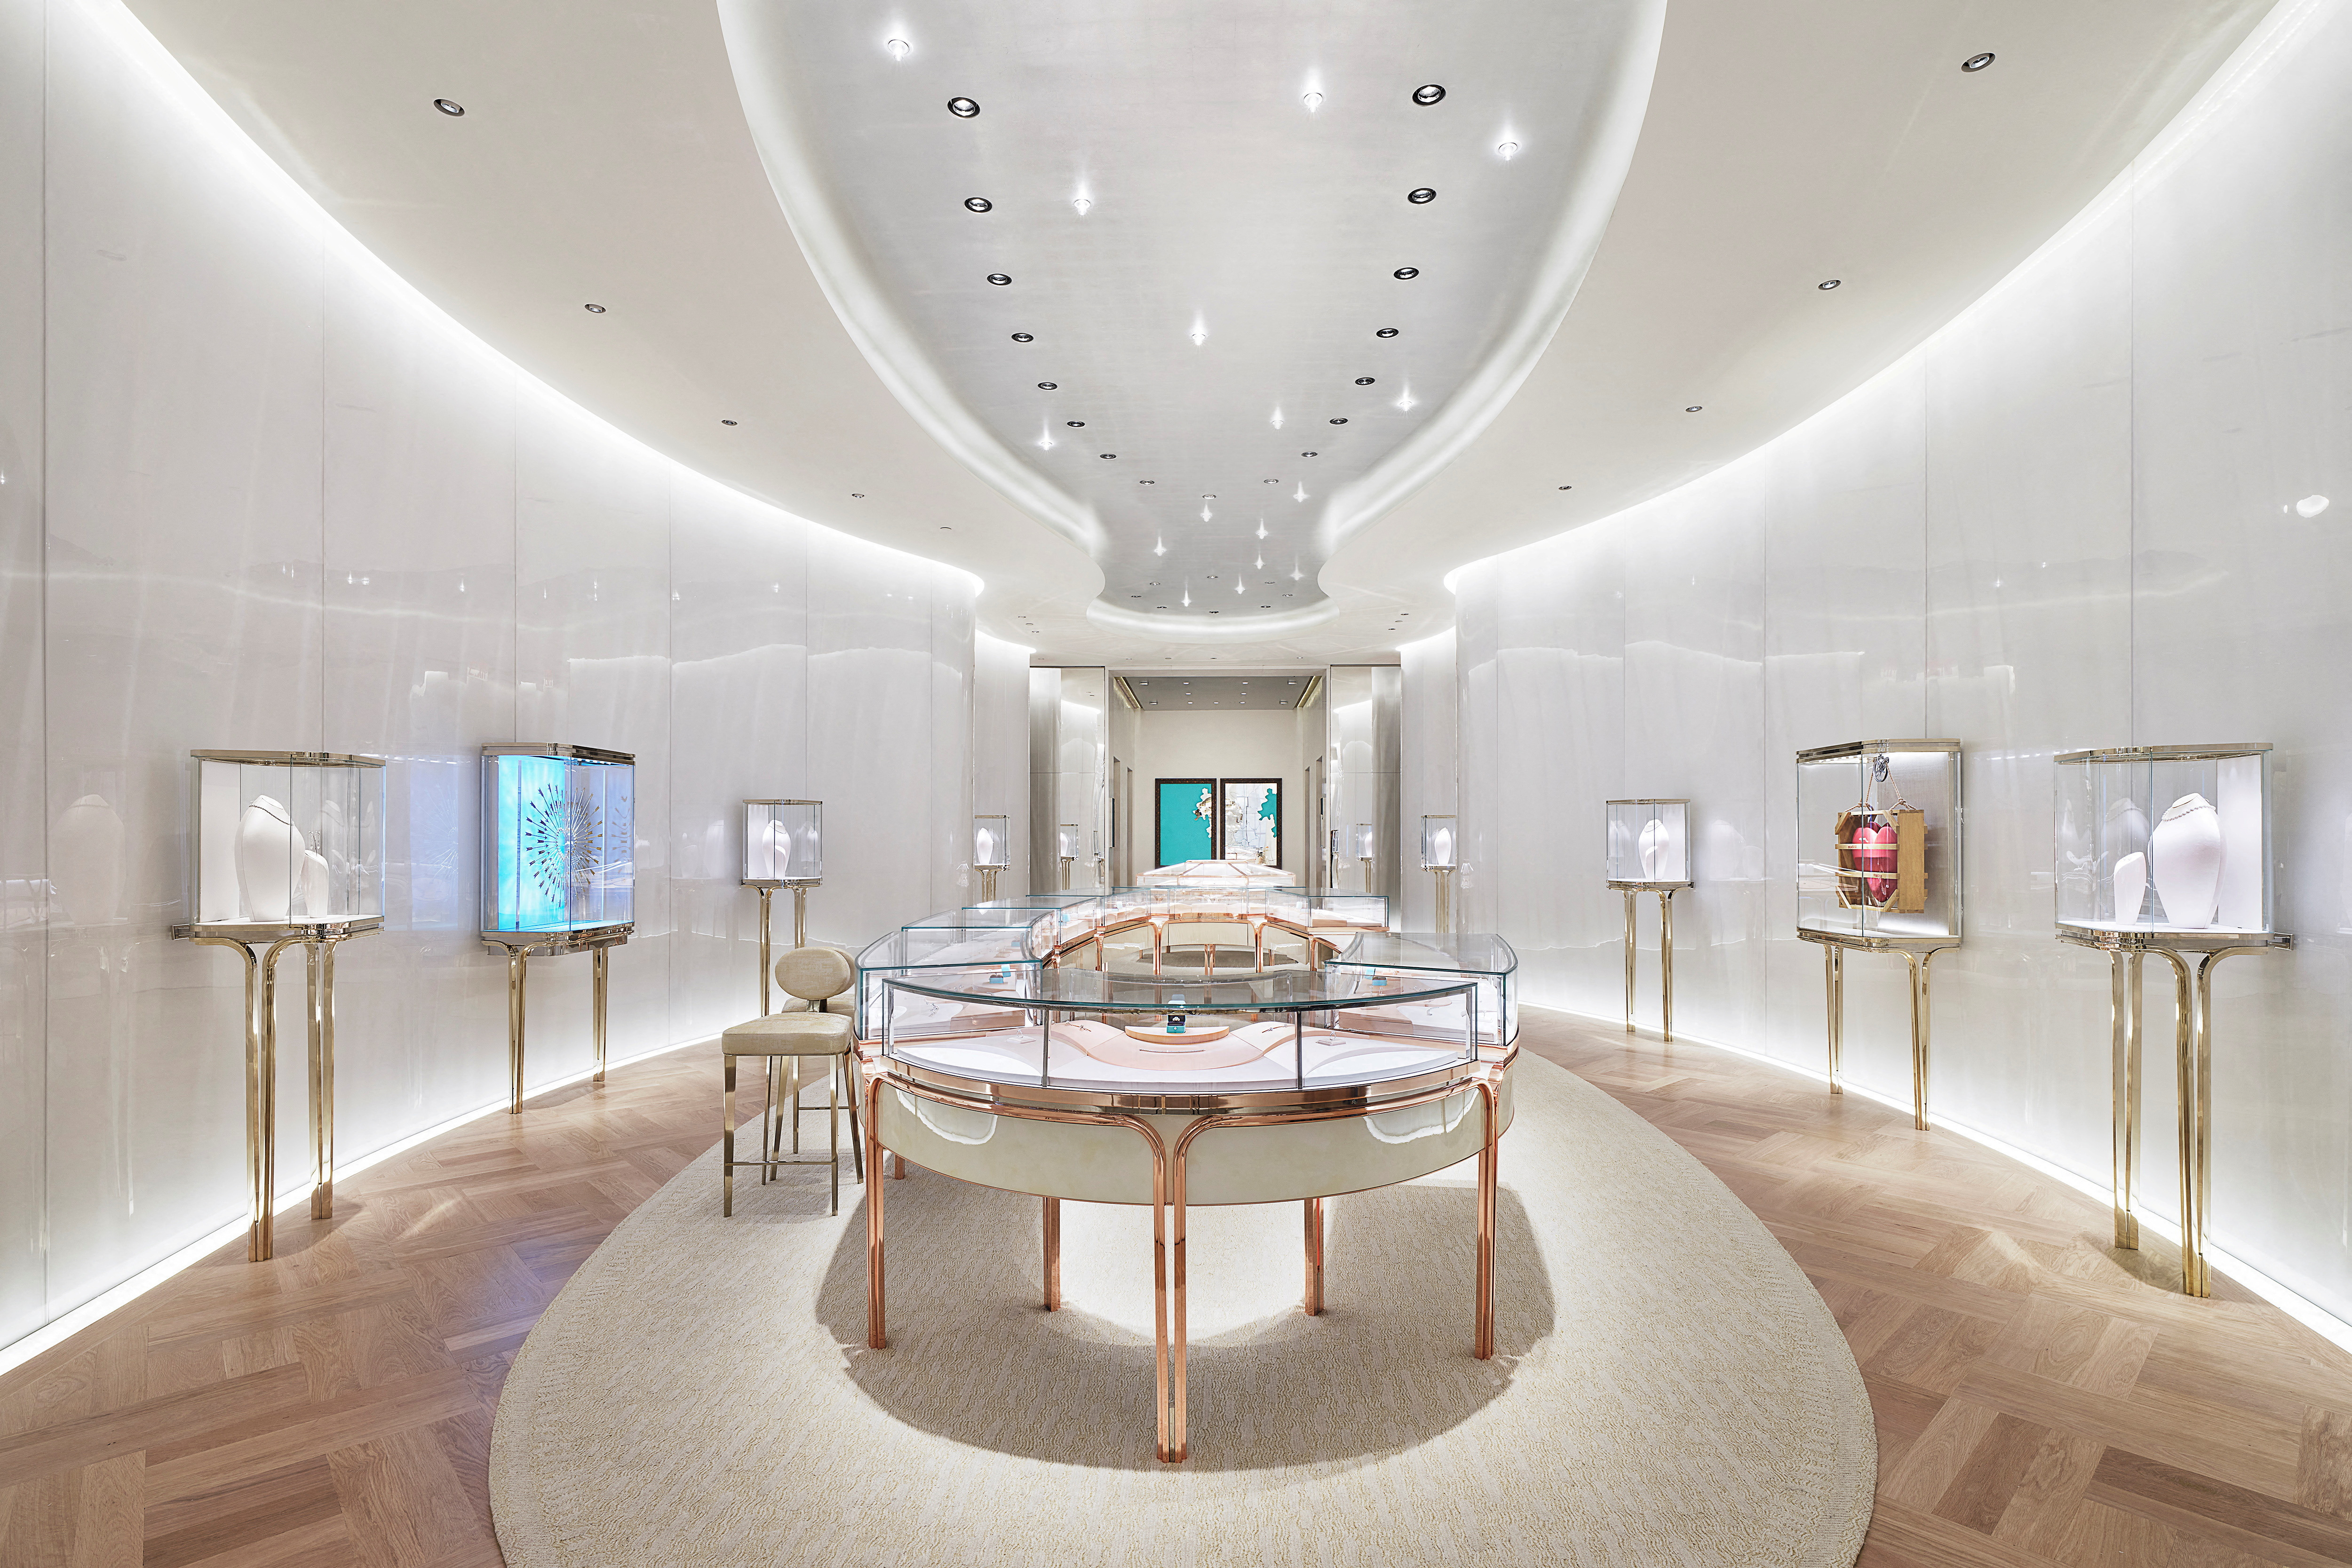 Integrating Tiffany & Co. Is A “Challenge,” LVMH Says – JCK